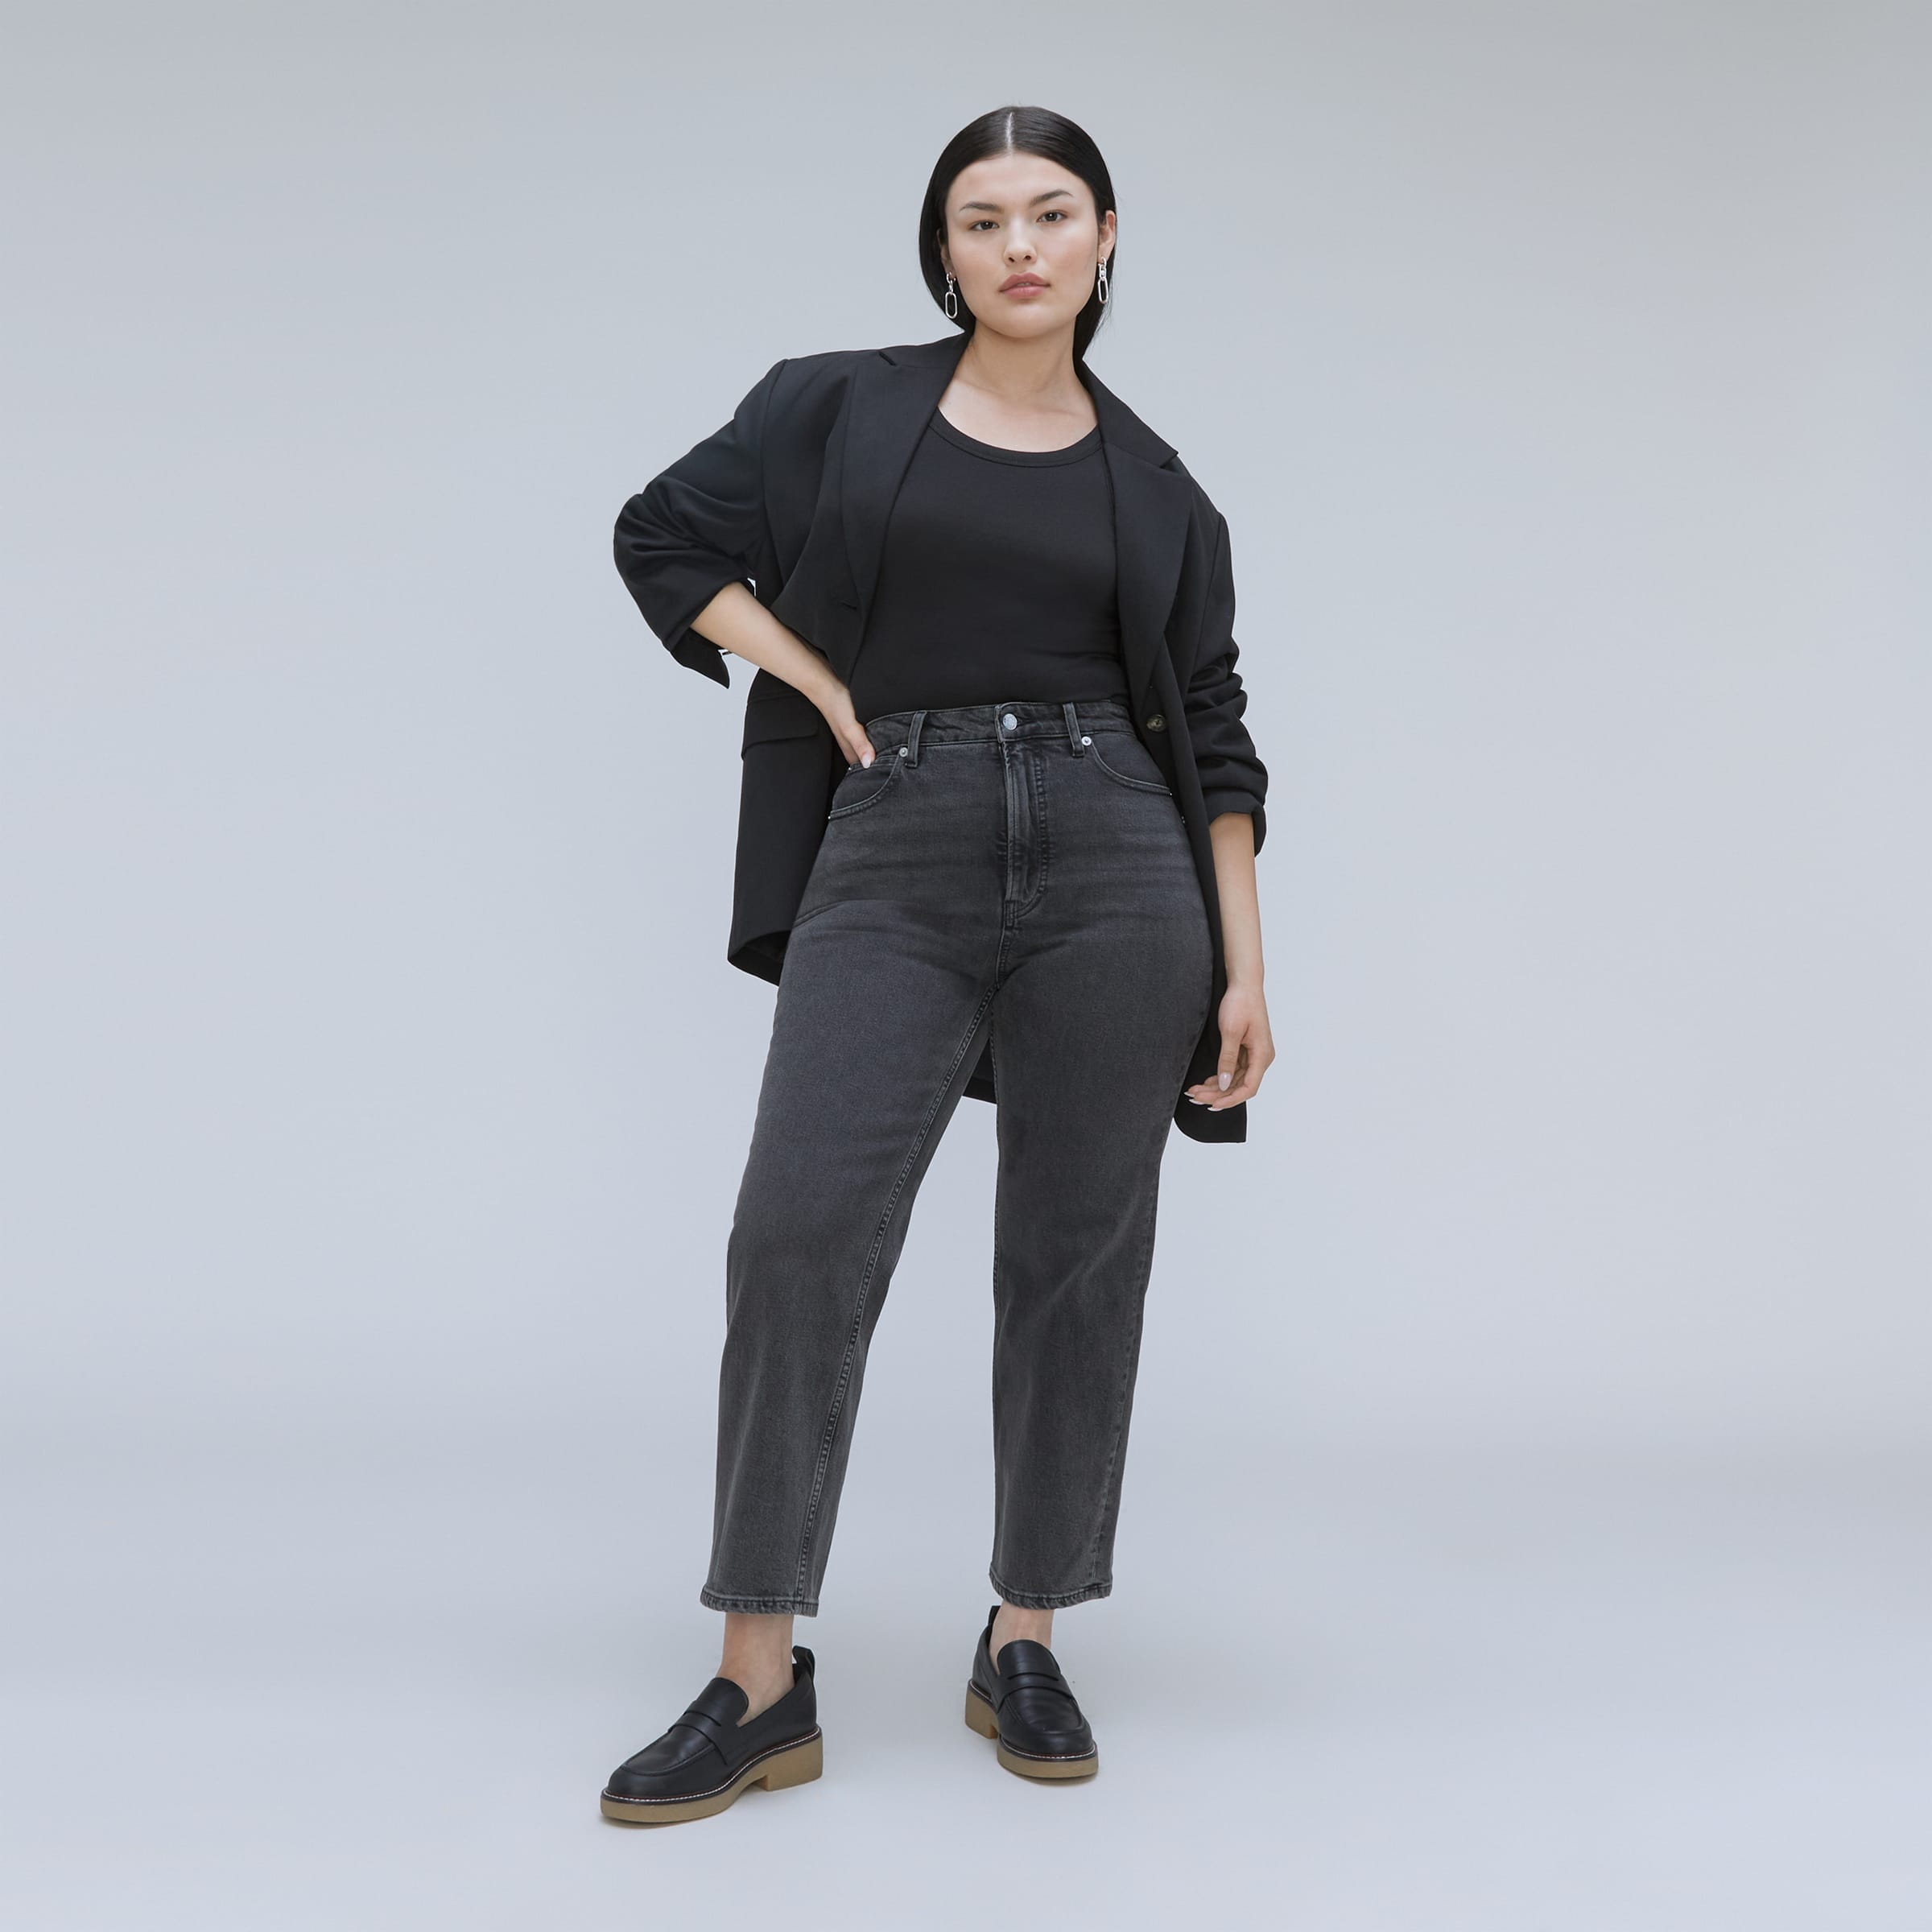 The Curvy Way-High® Jean Washed Black – Everlane